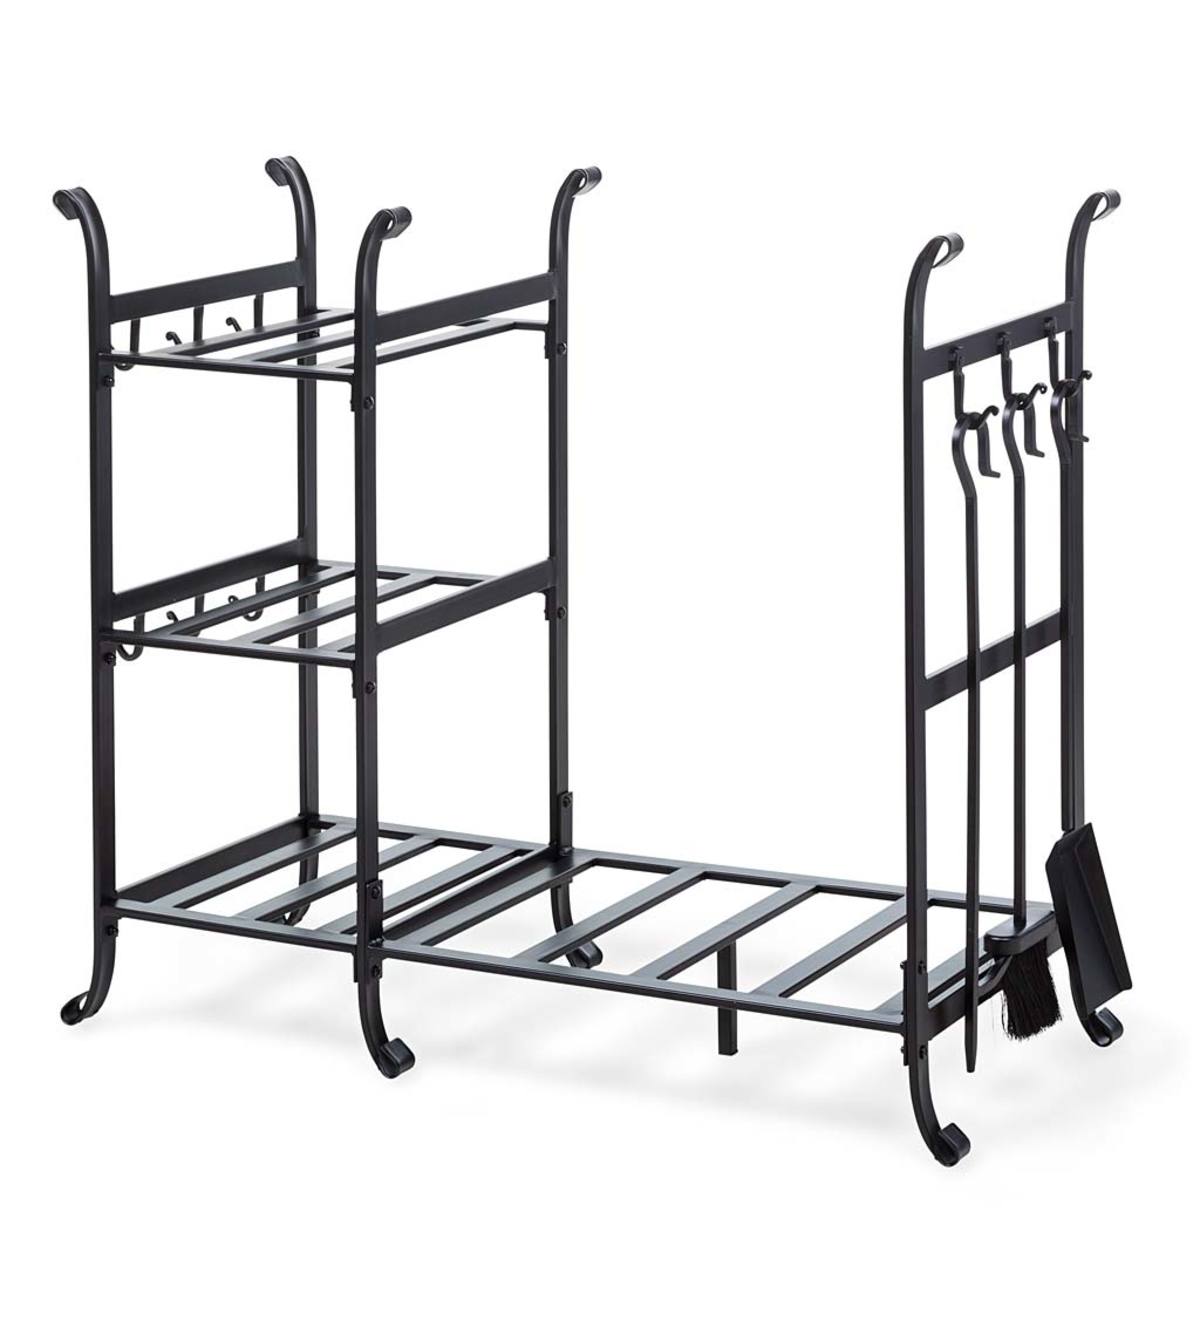 All-In-One Wood Rack with Tools - Black